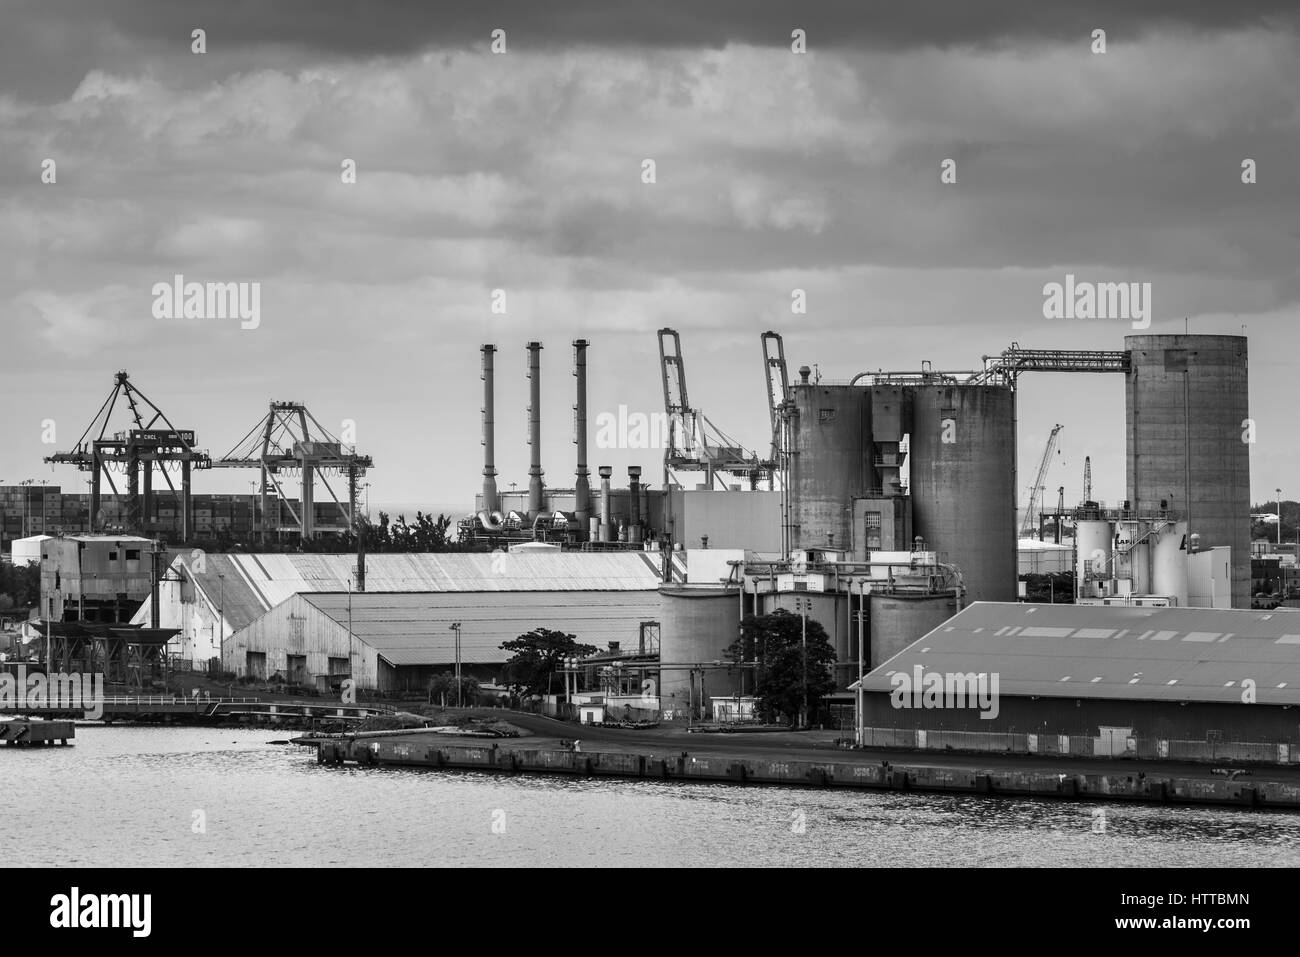 Port Louis, Mauritius - December 12, 2015: Industrial landscape in import export and business logistic at Port Louis, Mauritius. Black and white photo Stock Photo